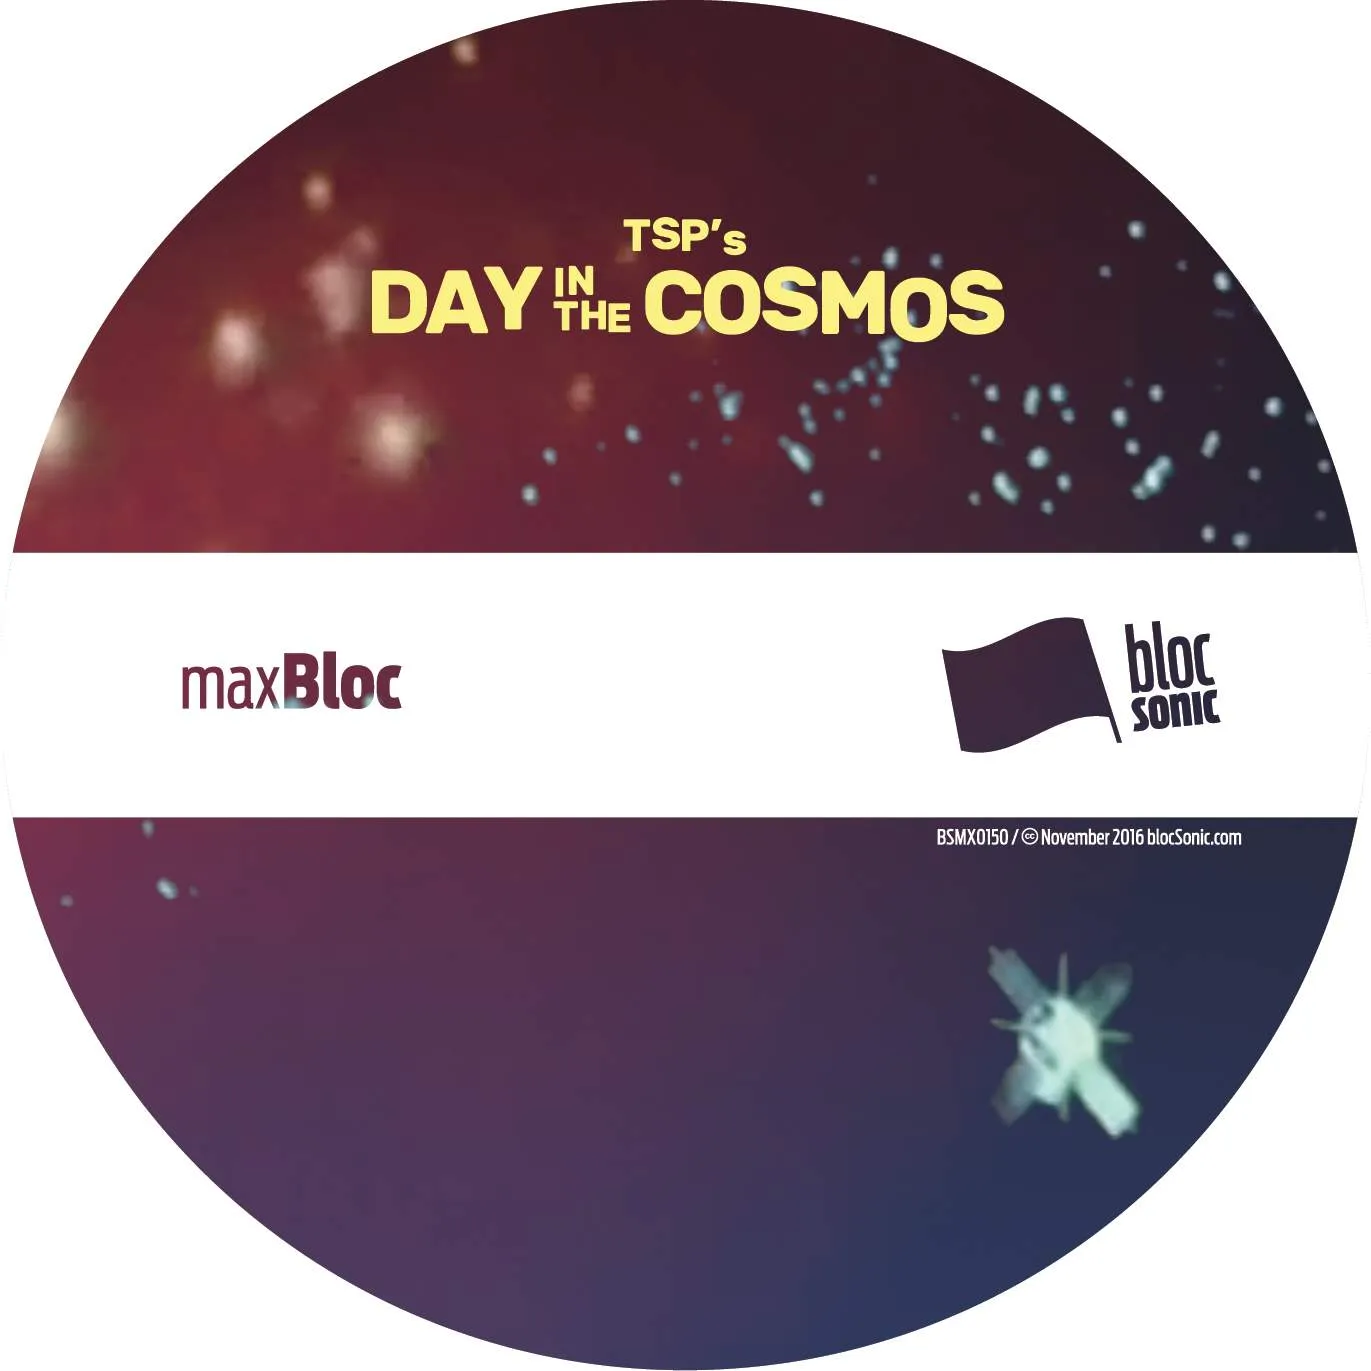 Album disc for “TSP’s Day In The Cosmos” by Tha Silent Partner